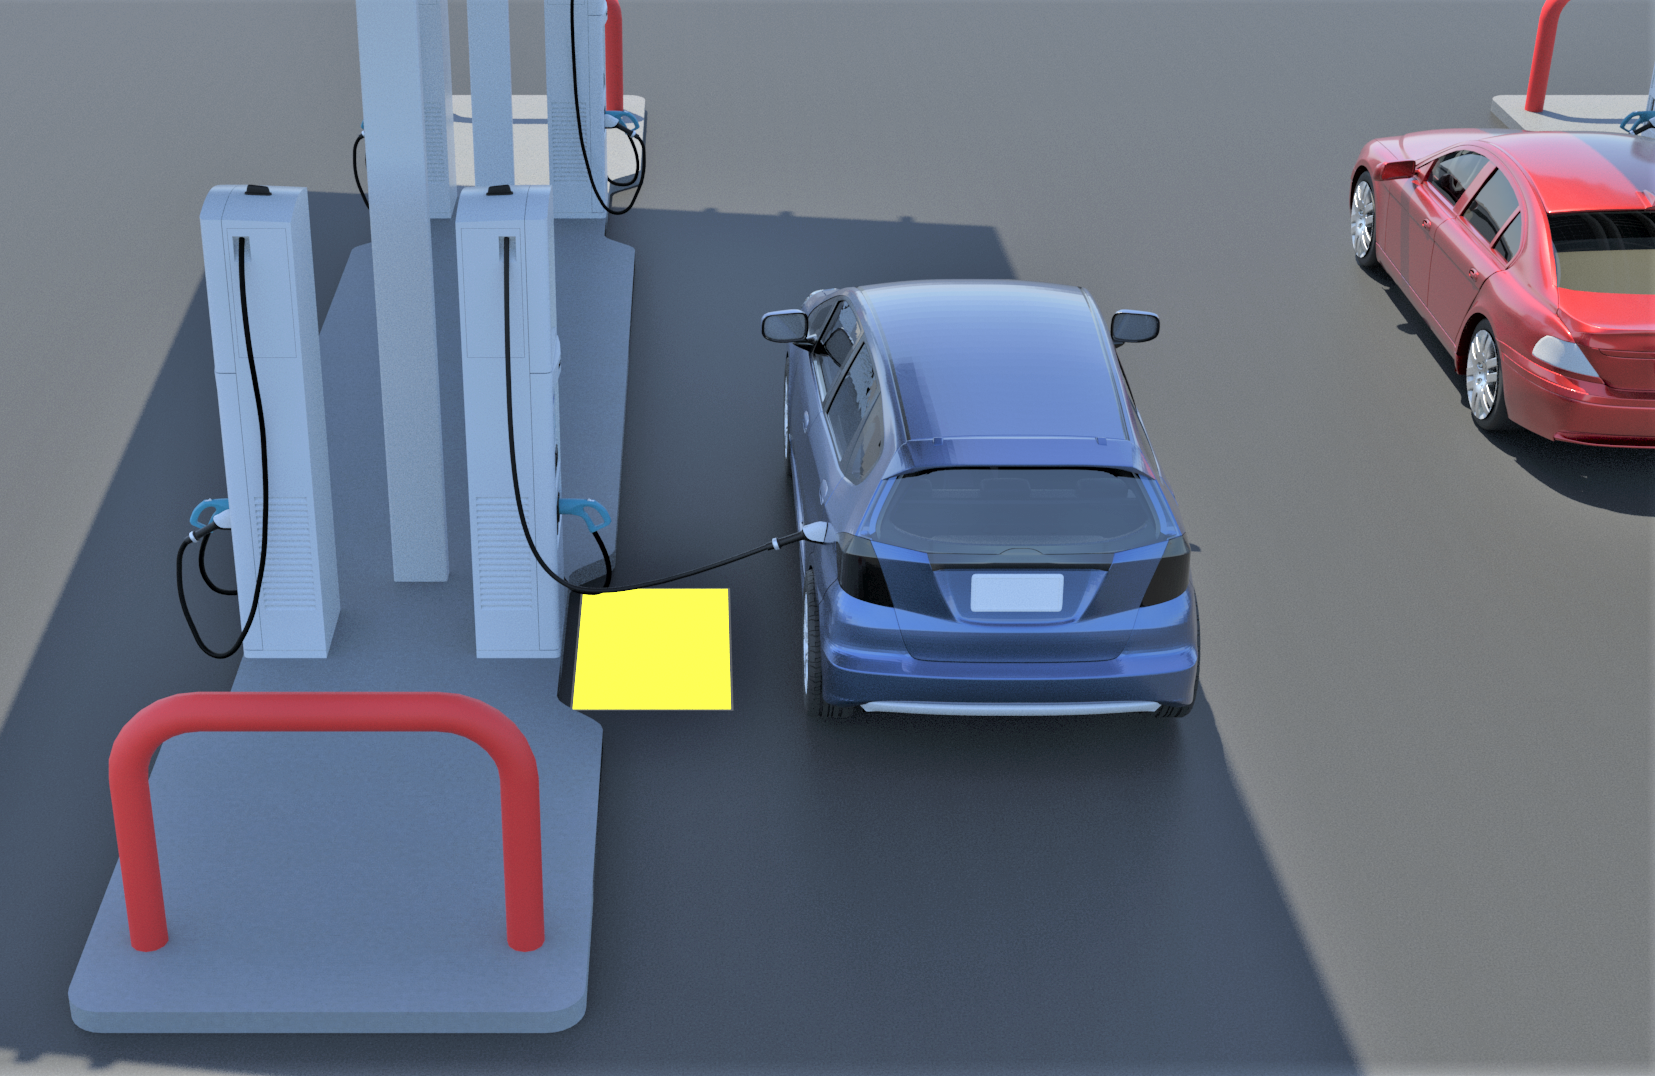 A blue EV with charging islands on the left. The EV charger is installed upon a curb. Curb cut outs are in front all EV chargers at the island. A yellow rectangle indicates a clear floor space at the curb cut out that is positioned adjacent to the EV charger.